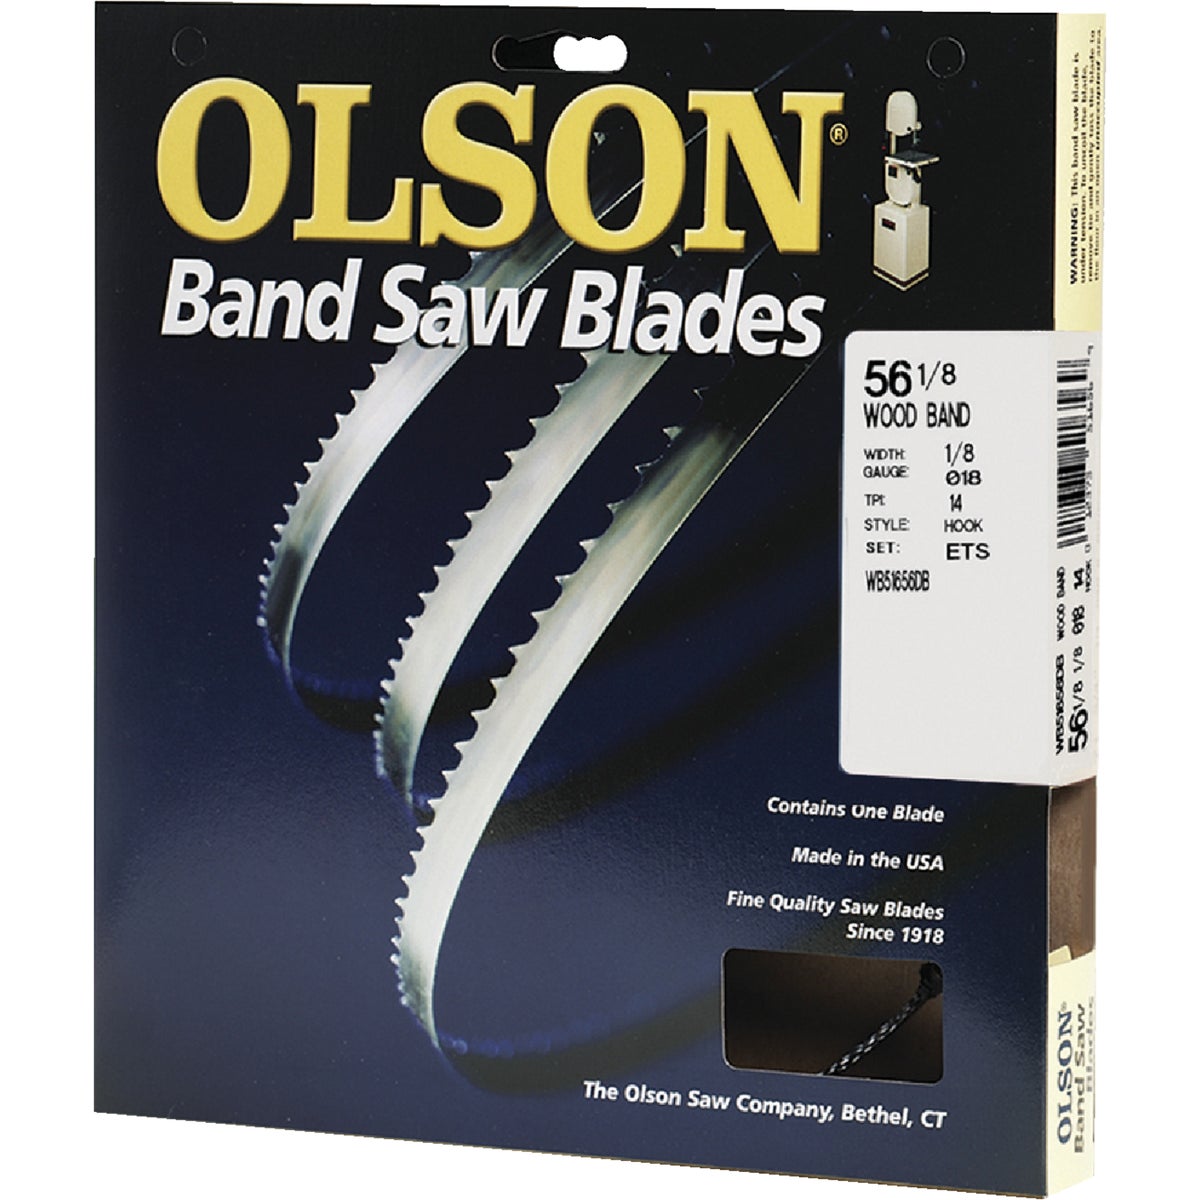 Olson 56-1/8 In. x 1/8 In. 14 TPI Hook Wood Cutting Band Saw Blade